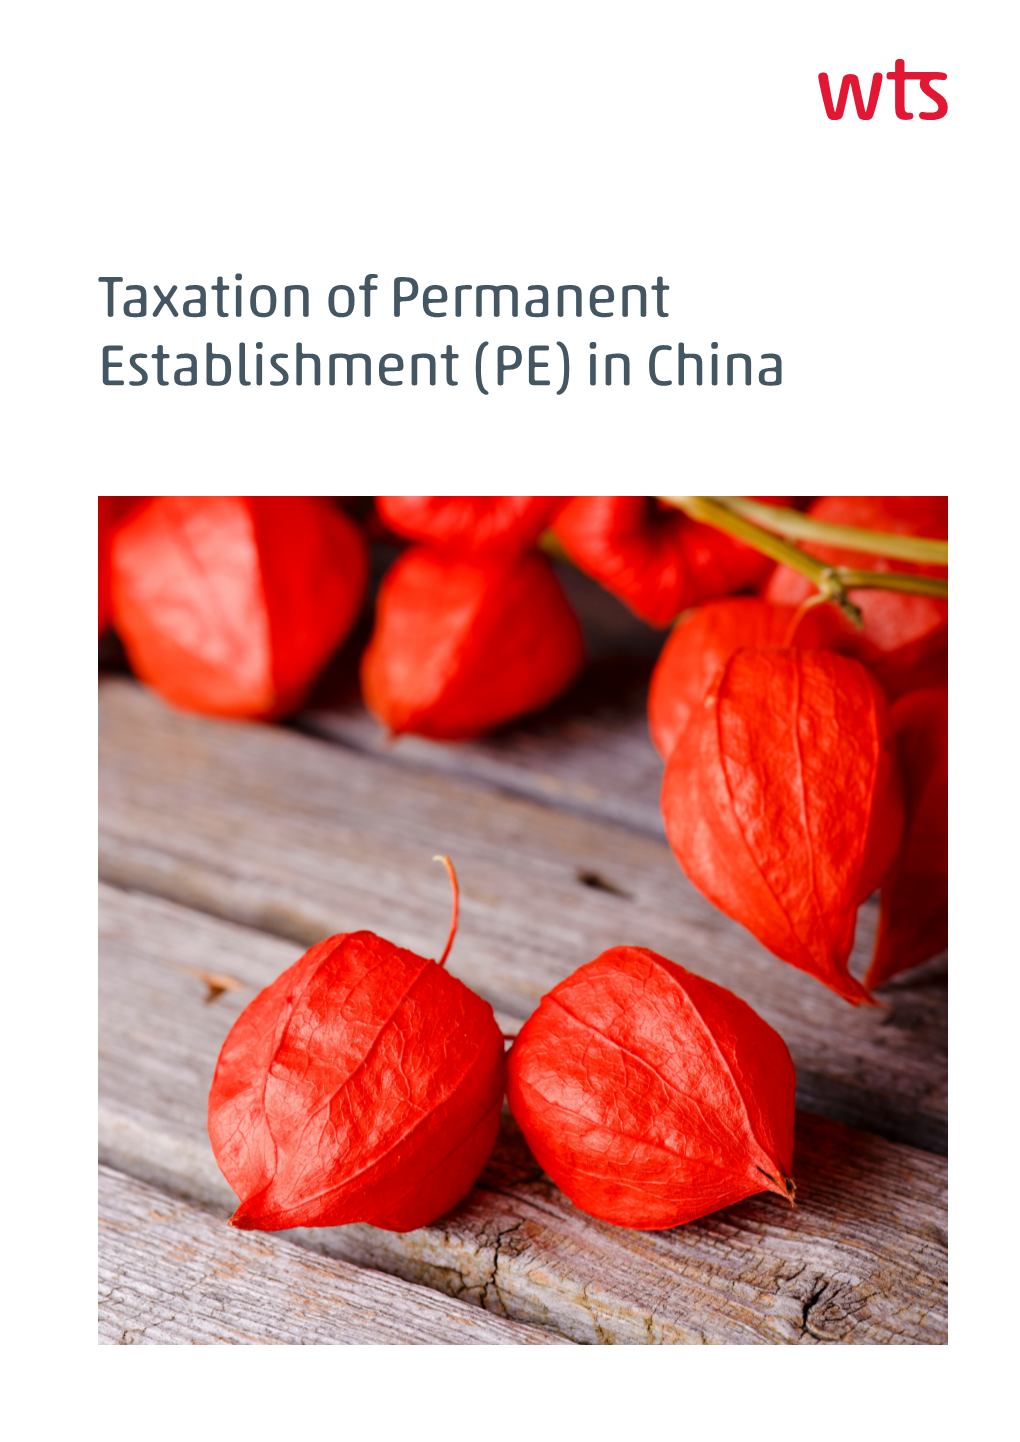 Taxation of Permanent Establishment (PE) in China About WTS